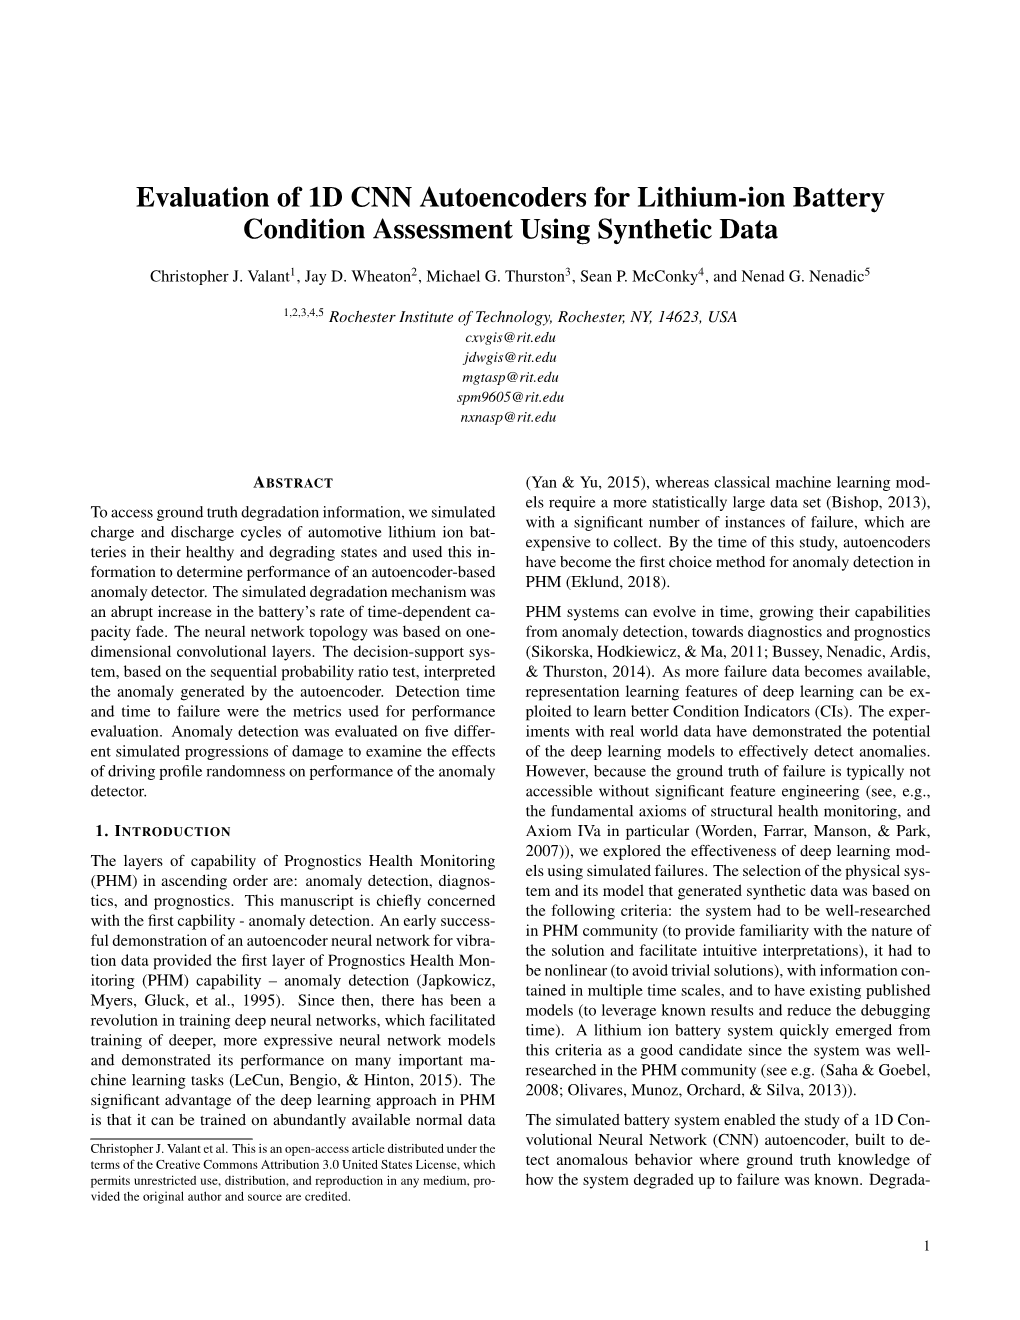 Evaluation of 1D CNN Autoencoders for Lithium-Ion Battery Condition Assessment Using Synthetic Data